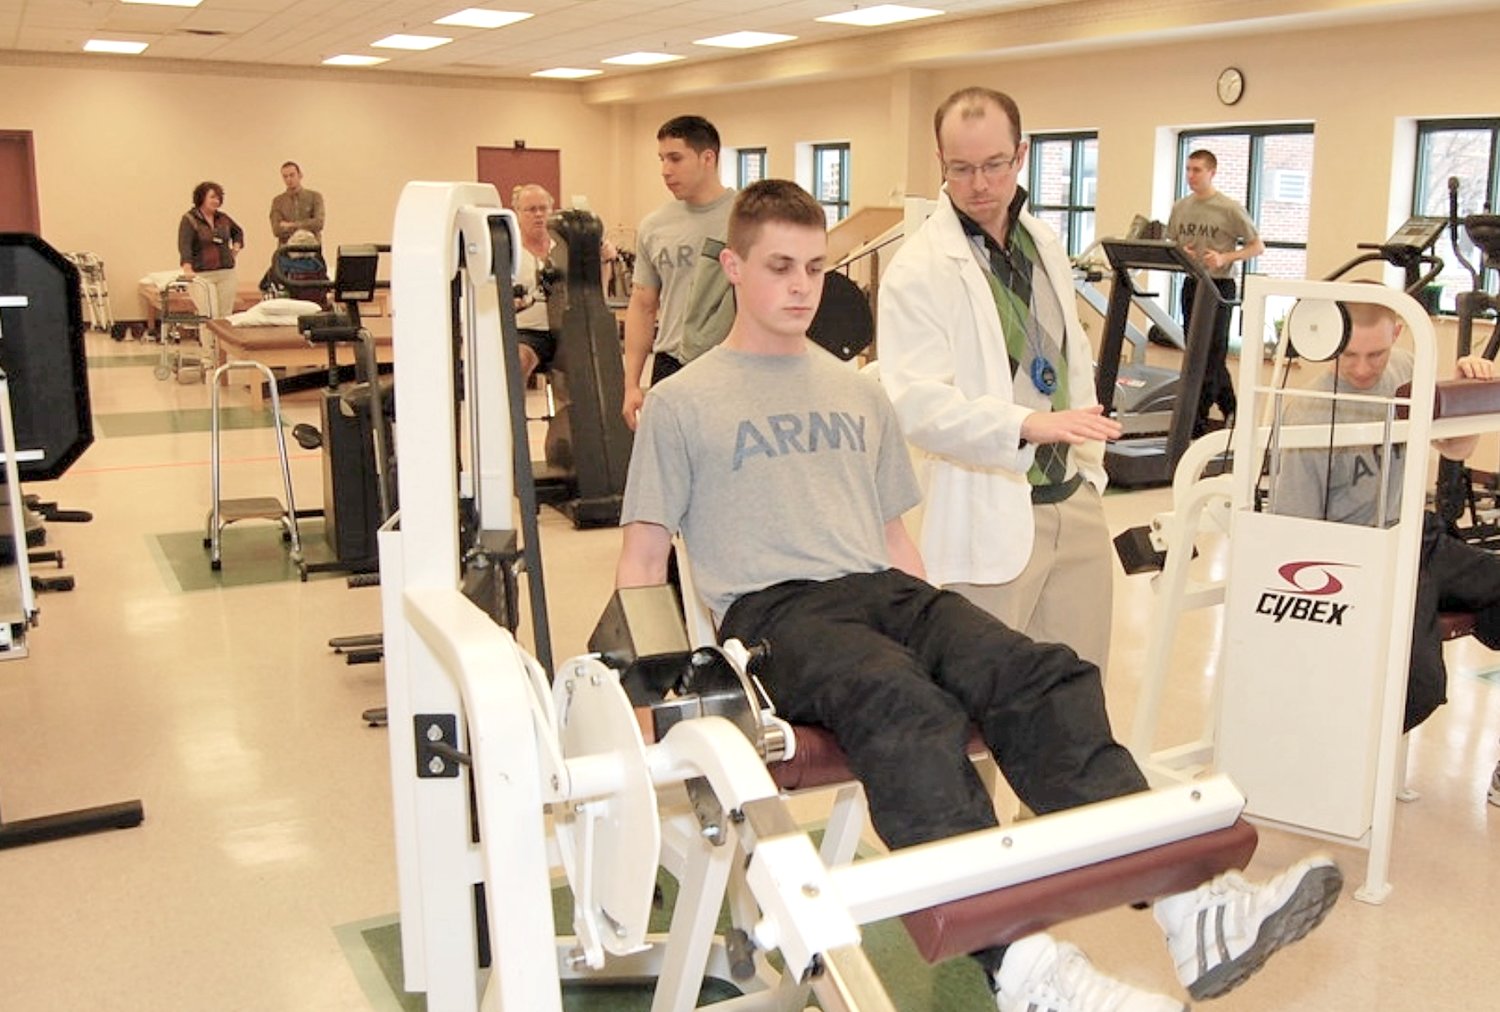 The Sitrin Military Program, which provides comprehensive, complimentary care to local post-9/11 veterans and service members who have post-traumatic stress, suicidal ideations, depression, amputations, spinal cord injuries and other combat-related conditions. Therapy and treatment options are personalized for each veteran based on military, combat, and reintegration experiences.